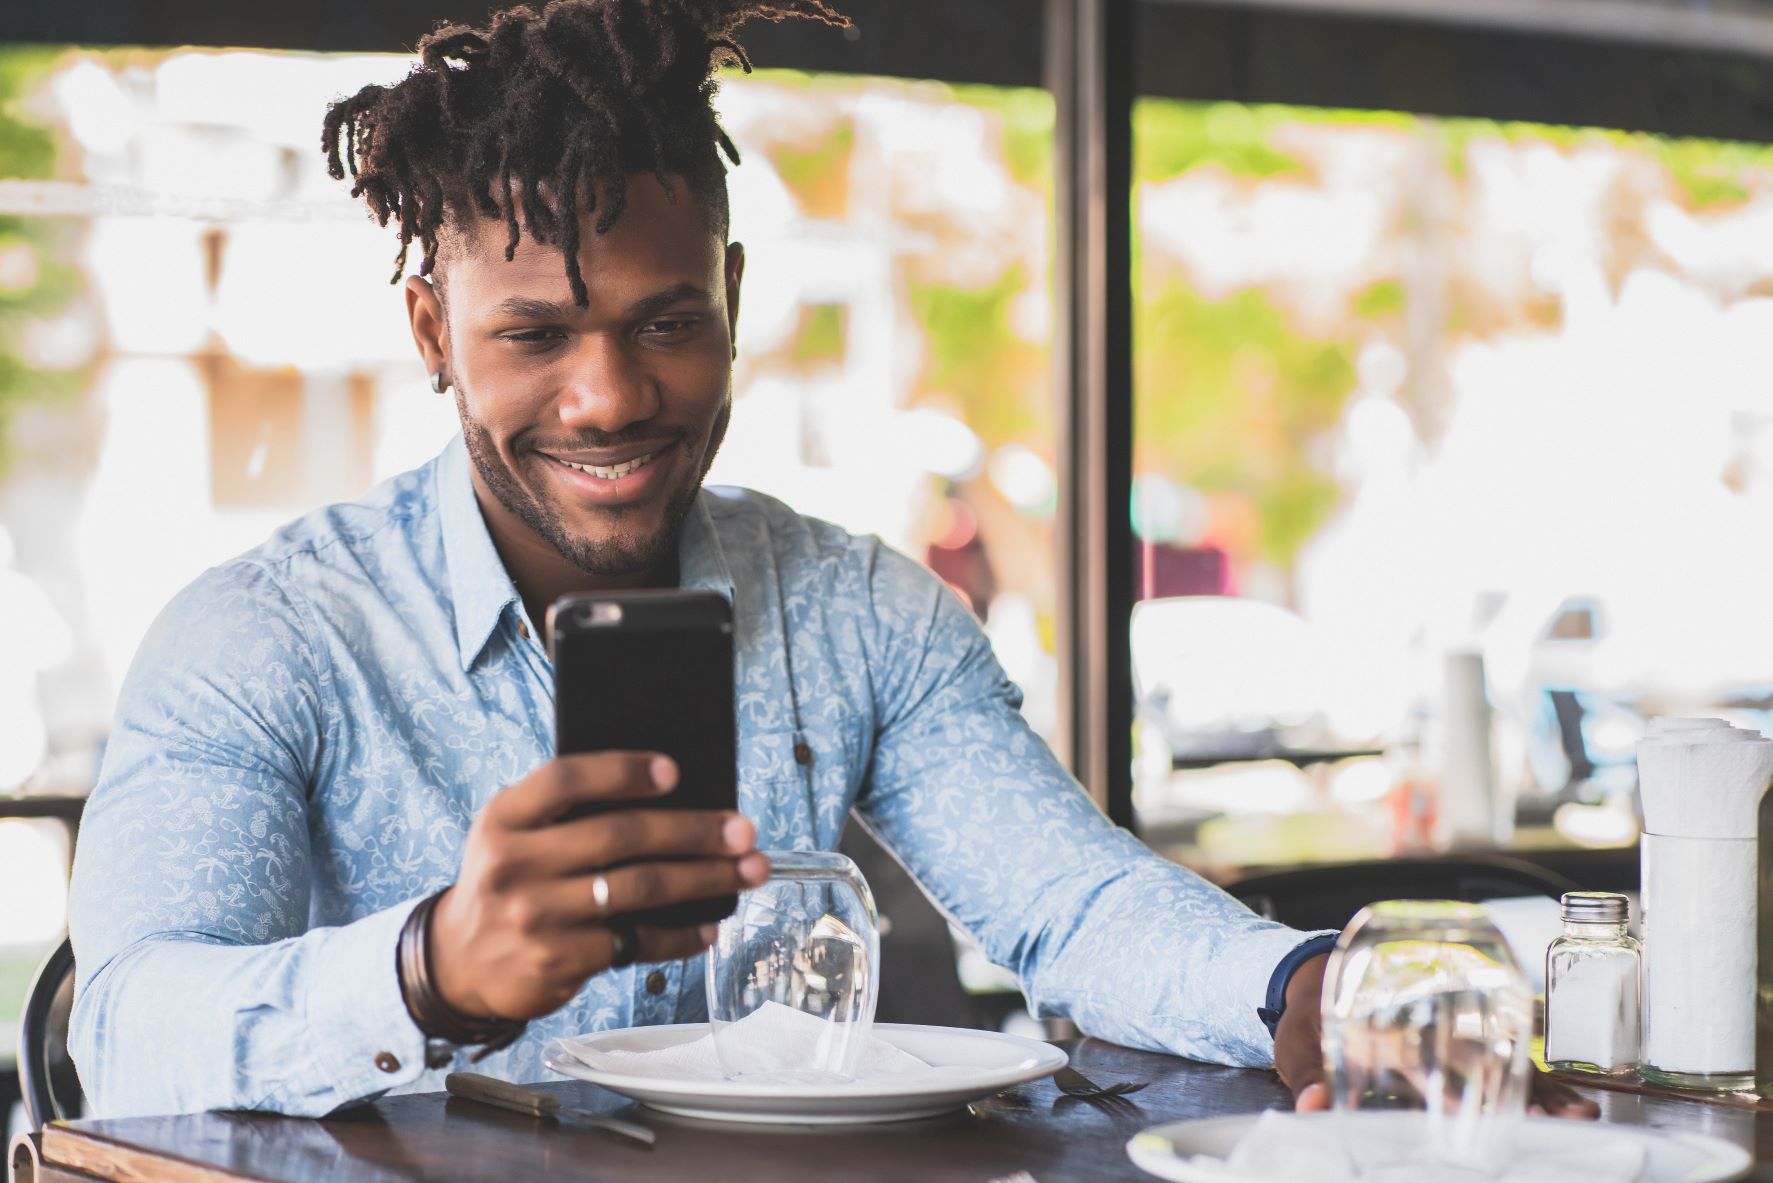 A Restaurant's Guide to Building a Strong Online Presence